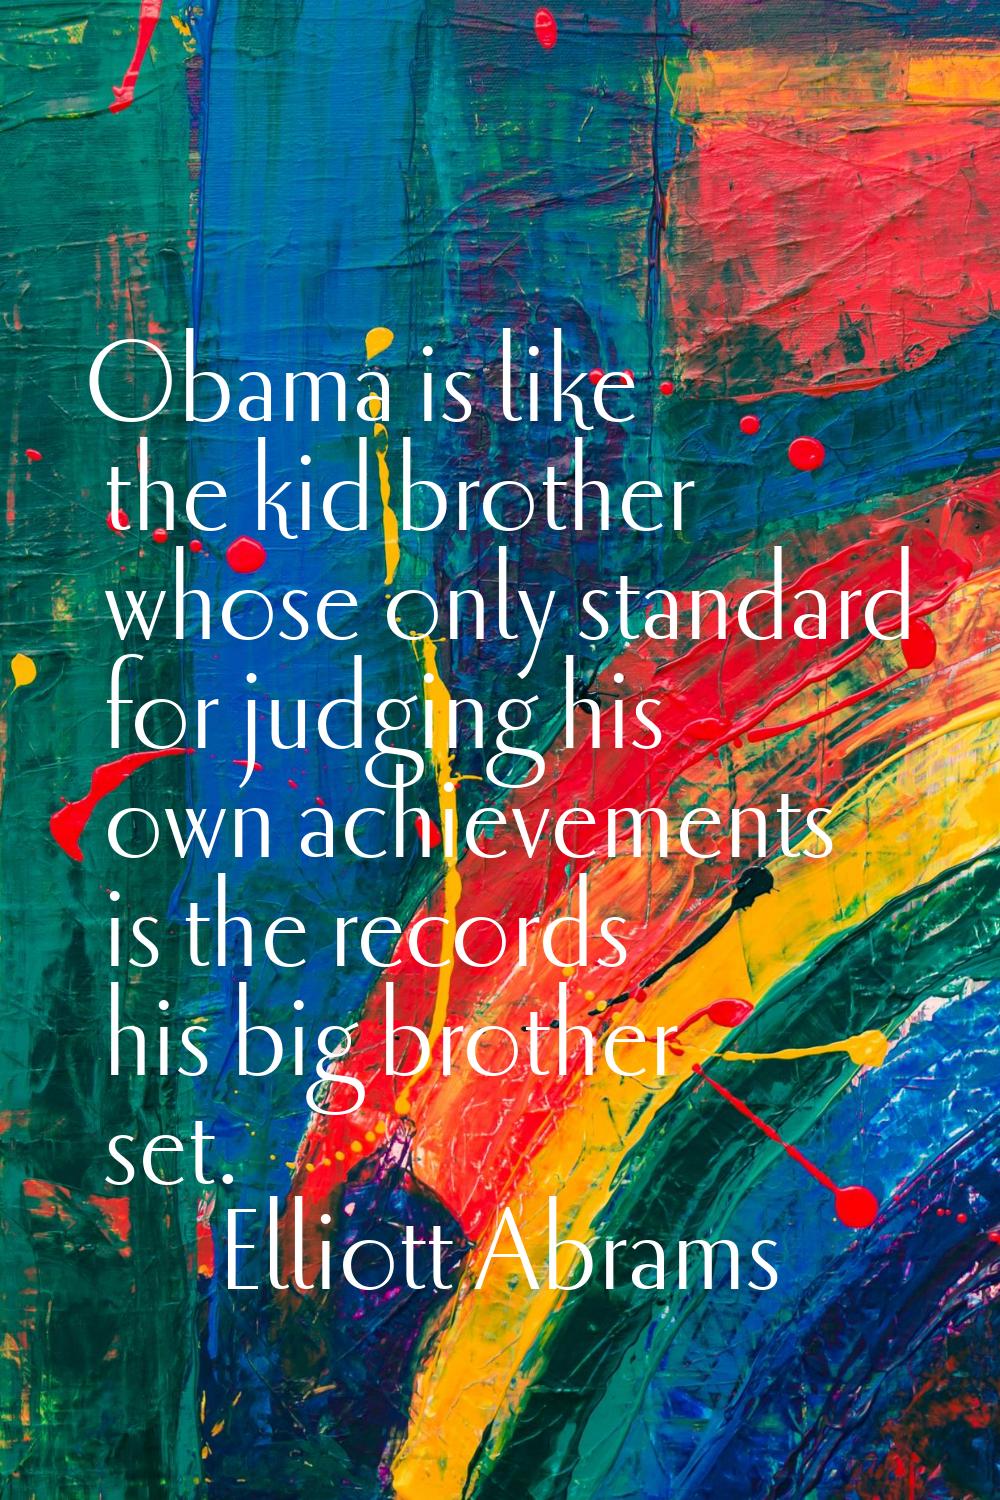 Obama is like the kid brother whose only standard for judging his own achievements is the records h